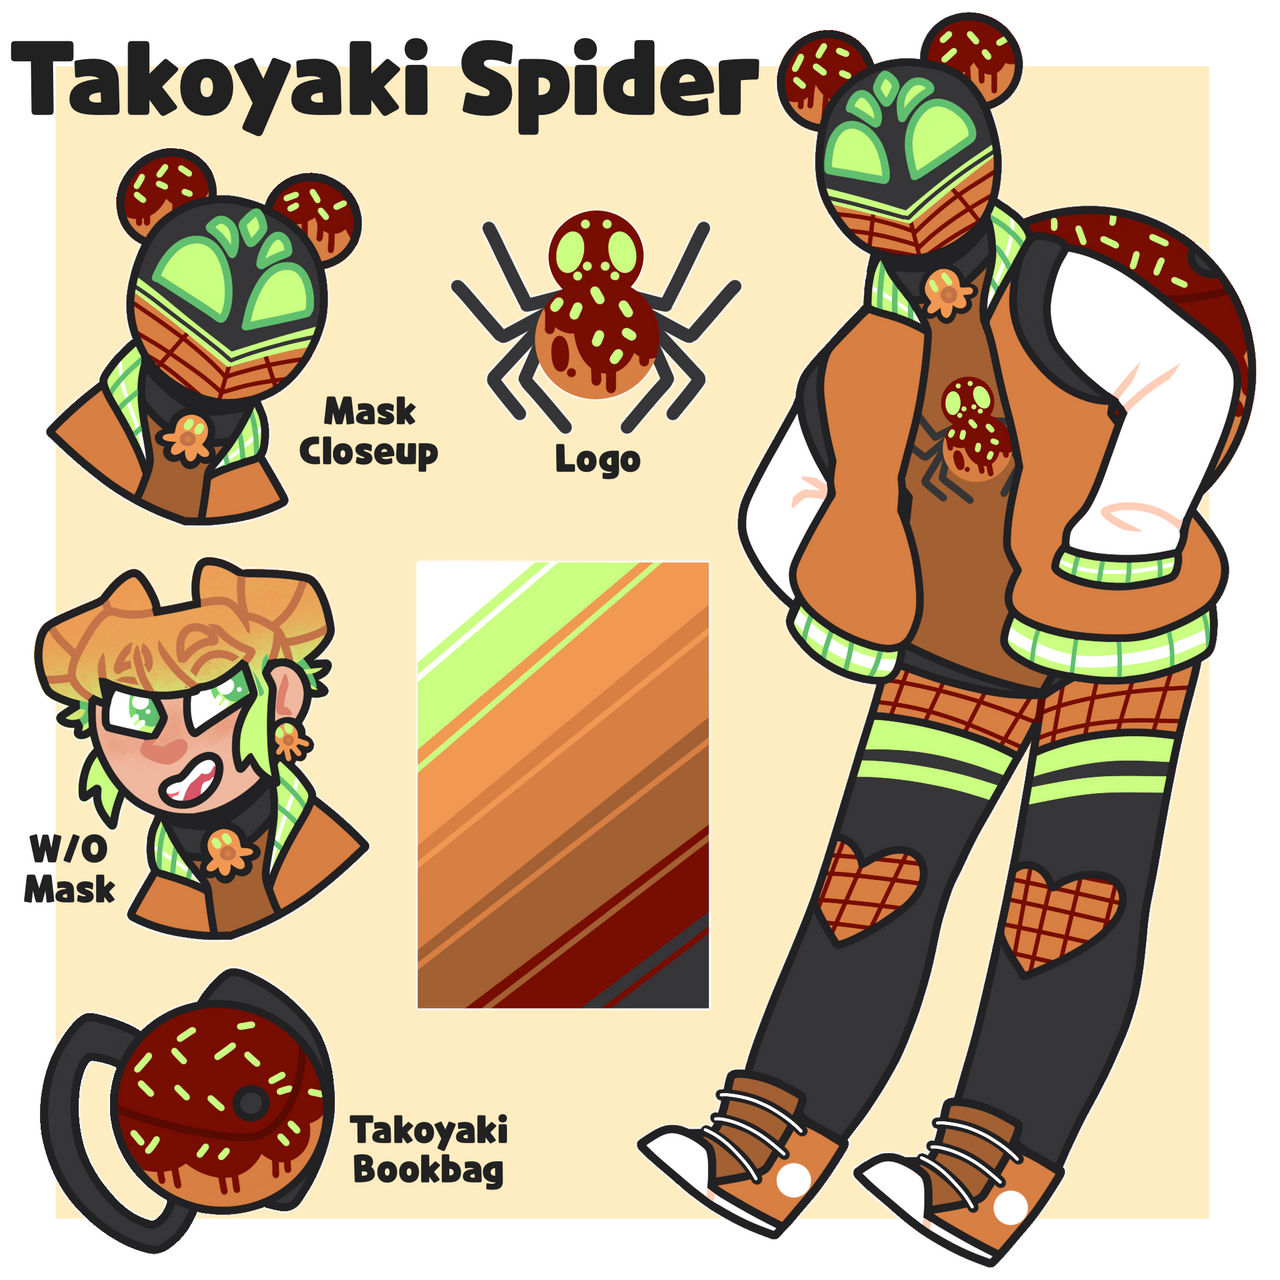 Bast's Art — I kind of wanted to join the spidersona bandwagon